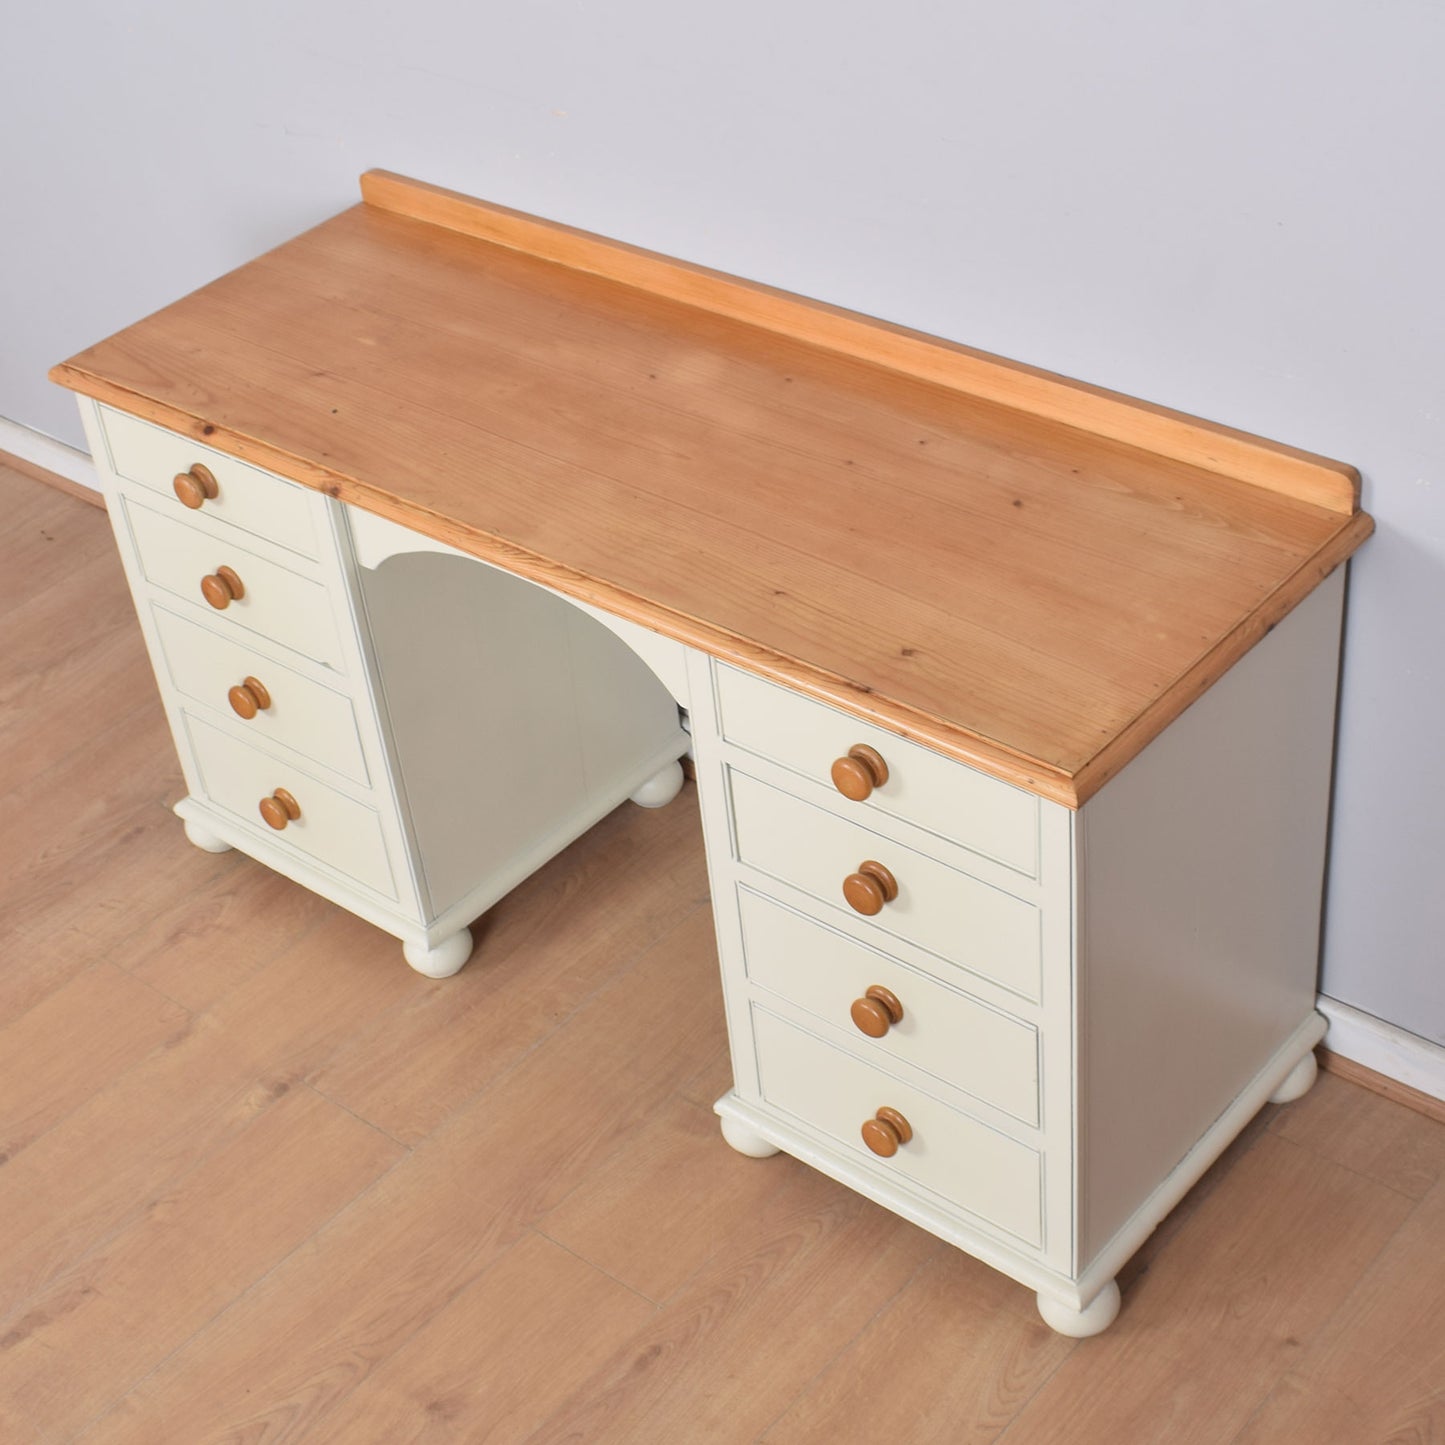 Painted Pine Dressing Table with Chair